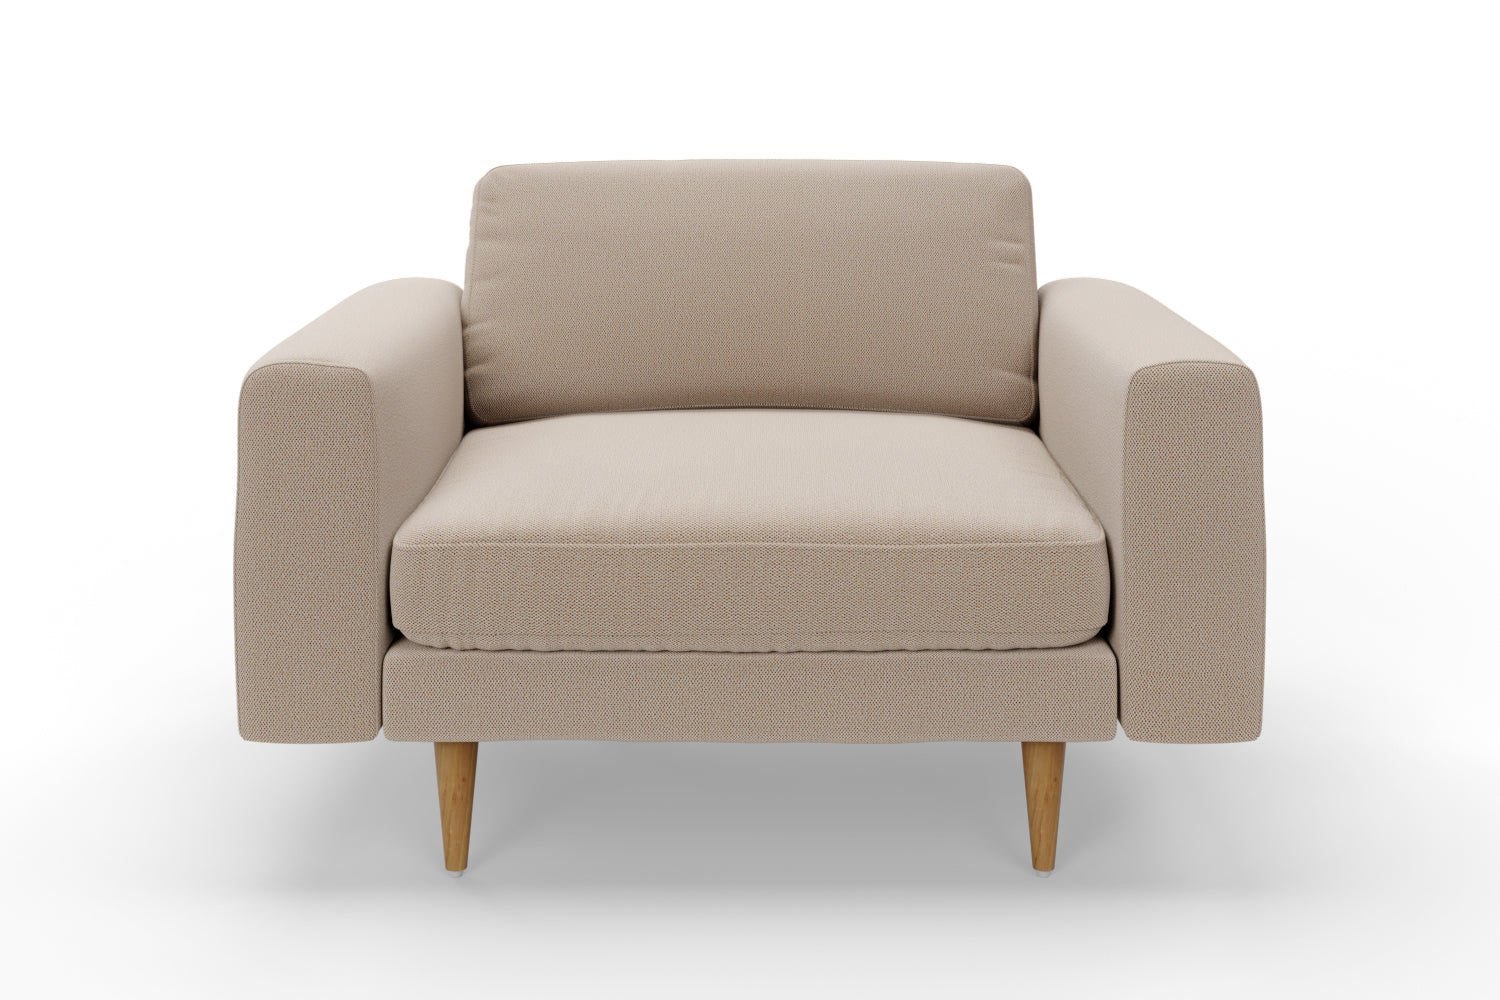 SNUG | The Big Chill 1.5 Seater Snuggler in Oatmeal variant_40414876106800